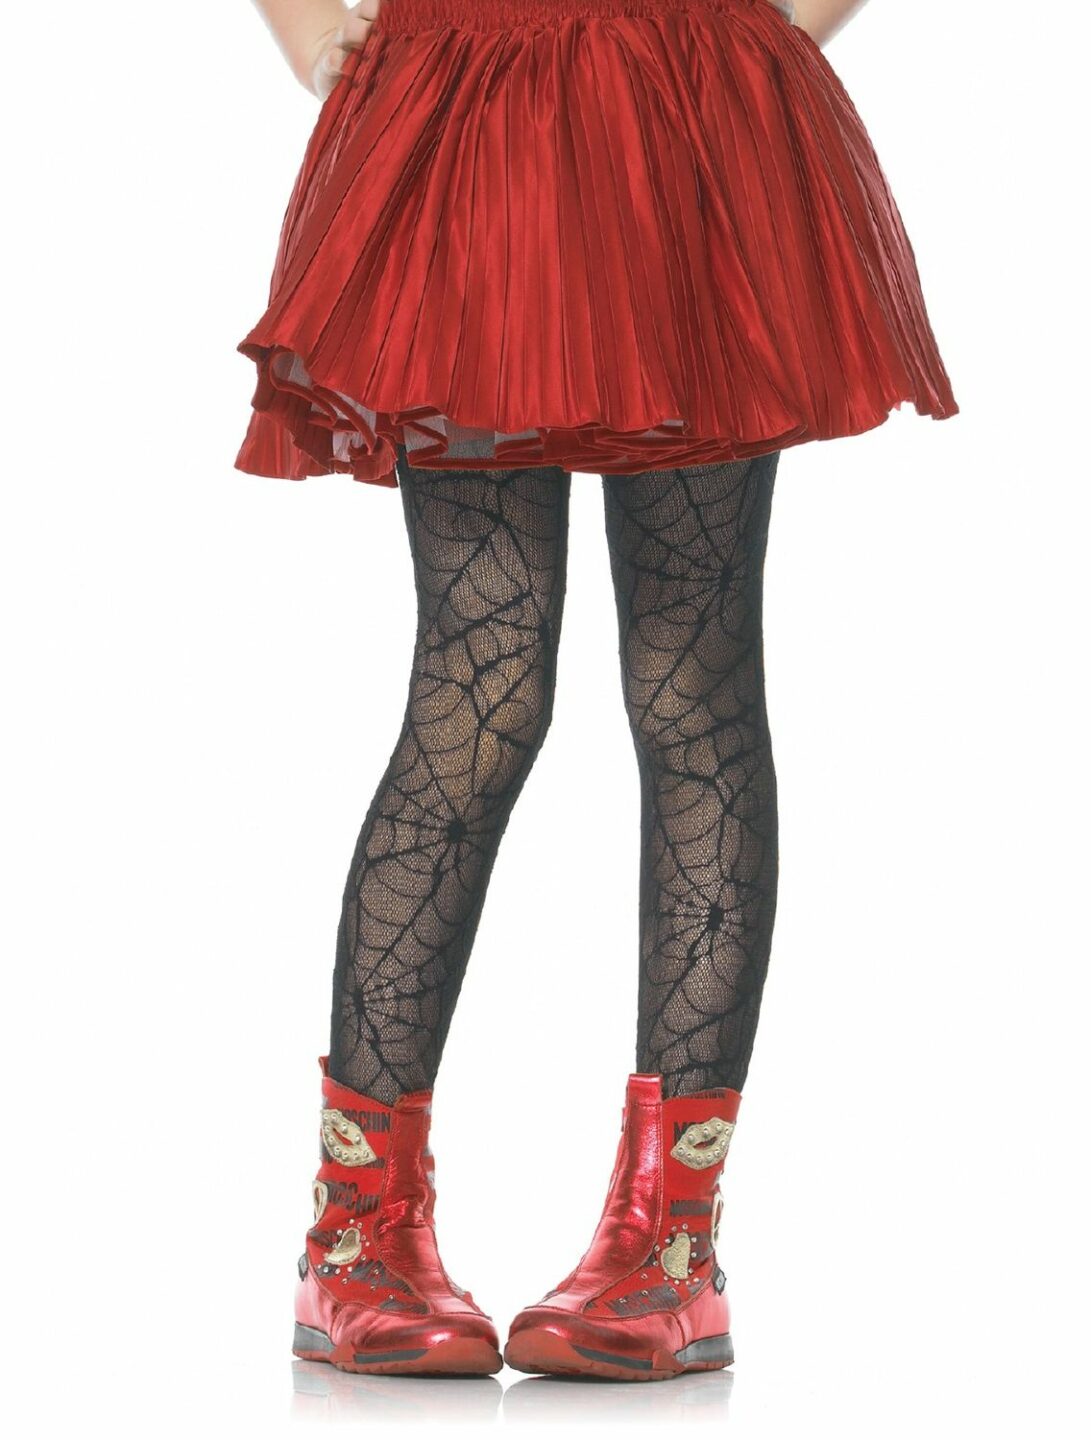 Child Spider Web Tights - Party WOW